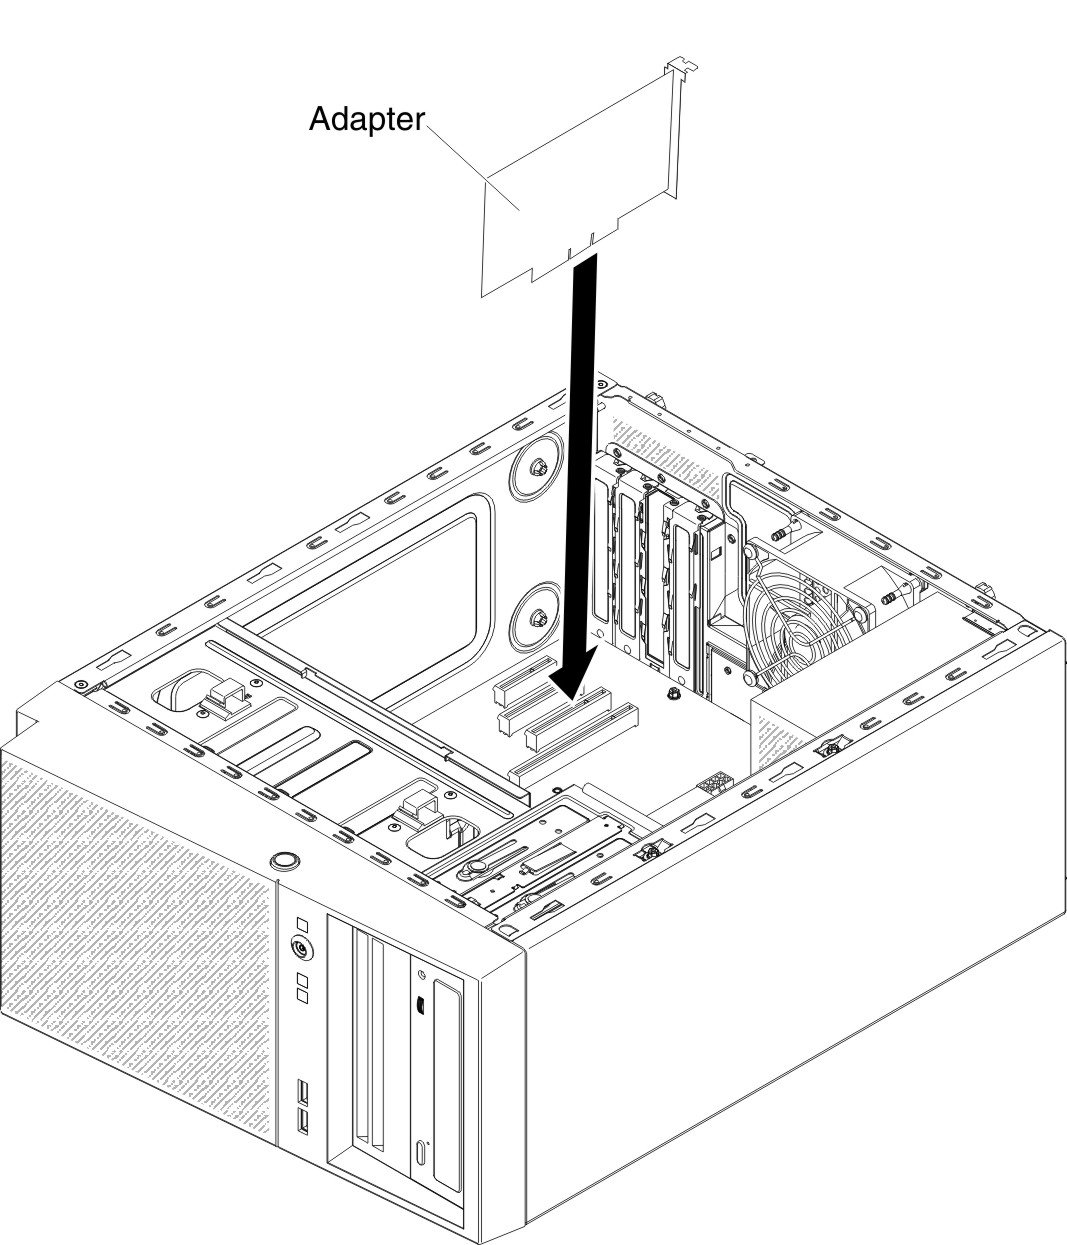 Adapter installation for 4U server model with non-hot-swap power supplies